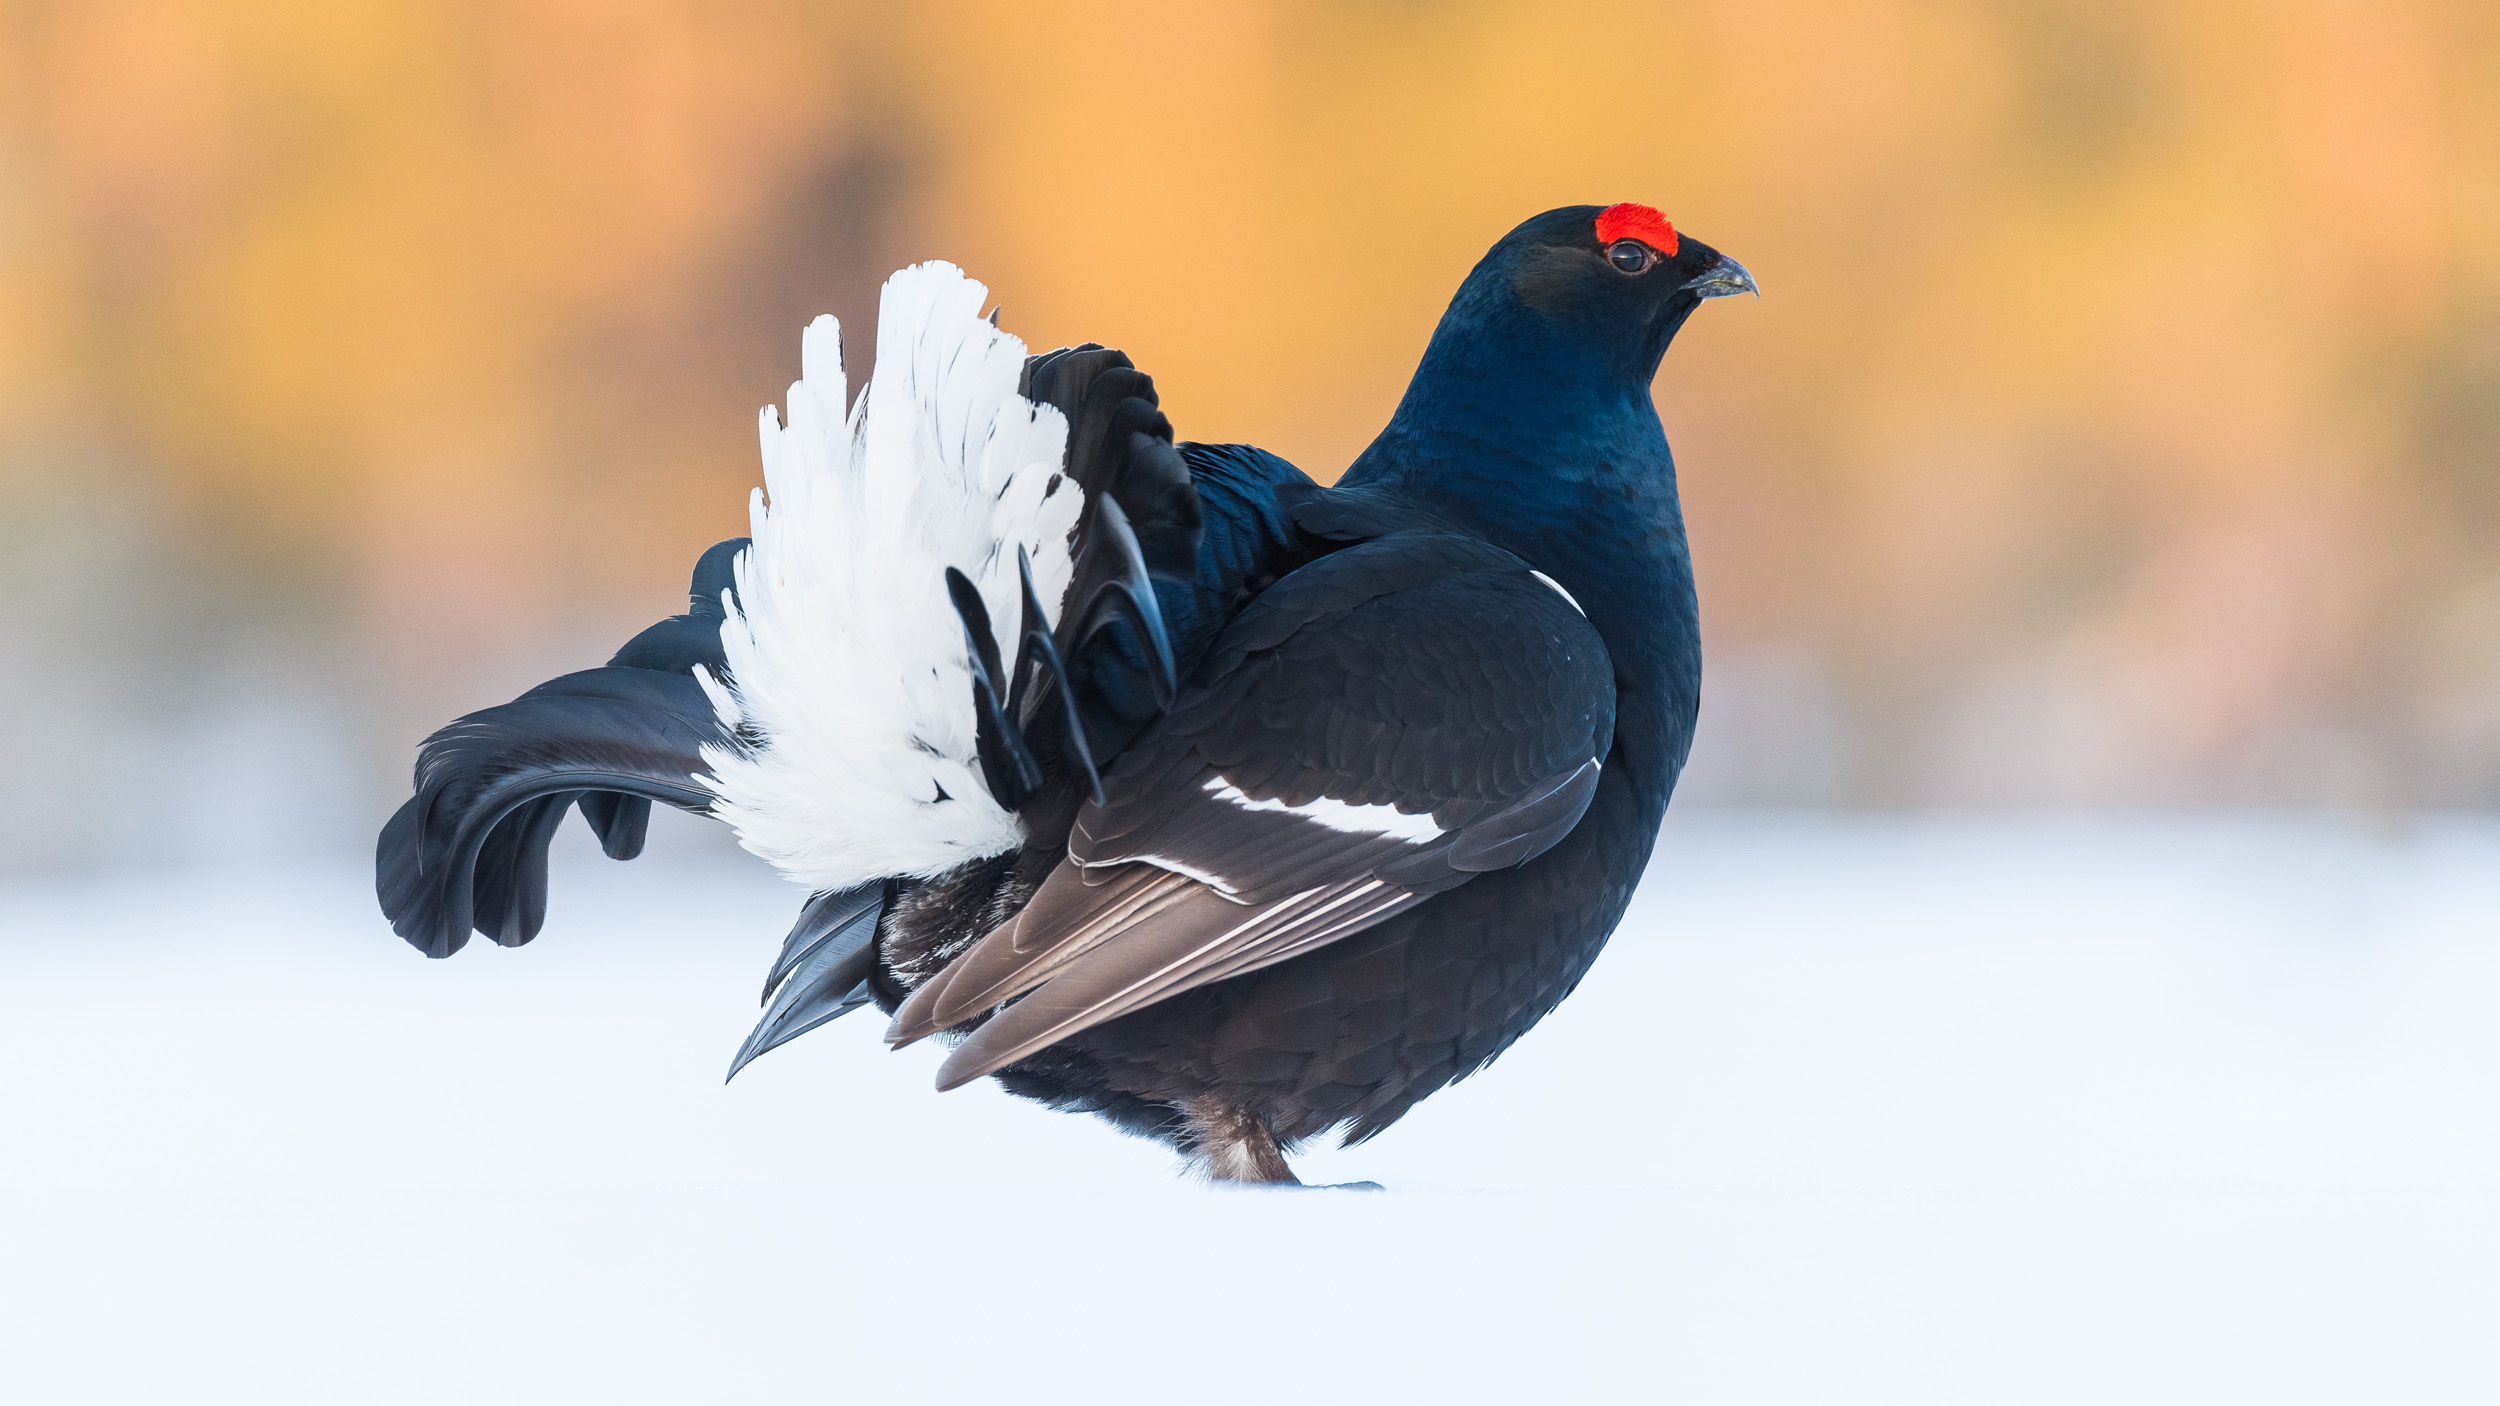 A Black Grouse stood in the snow with their back to the camera.